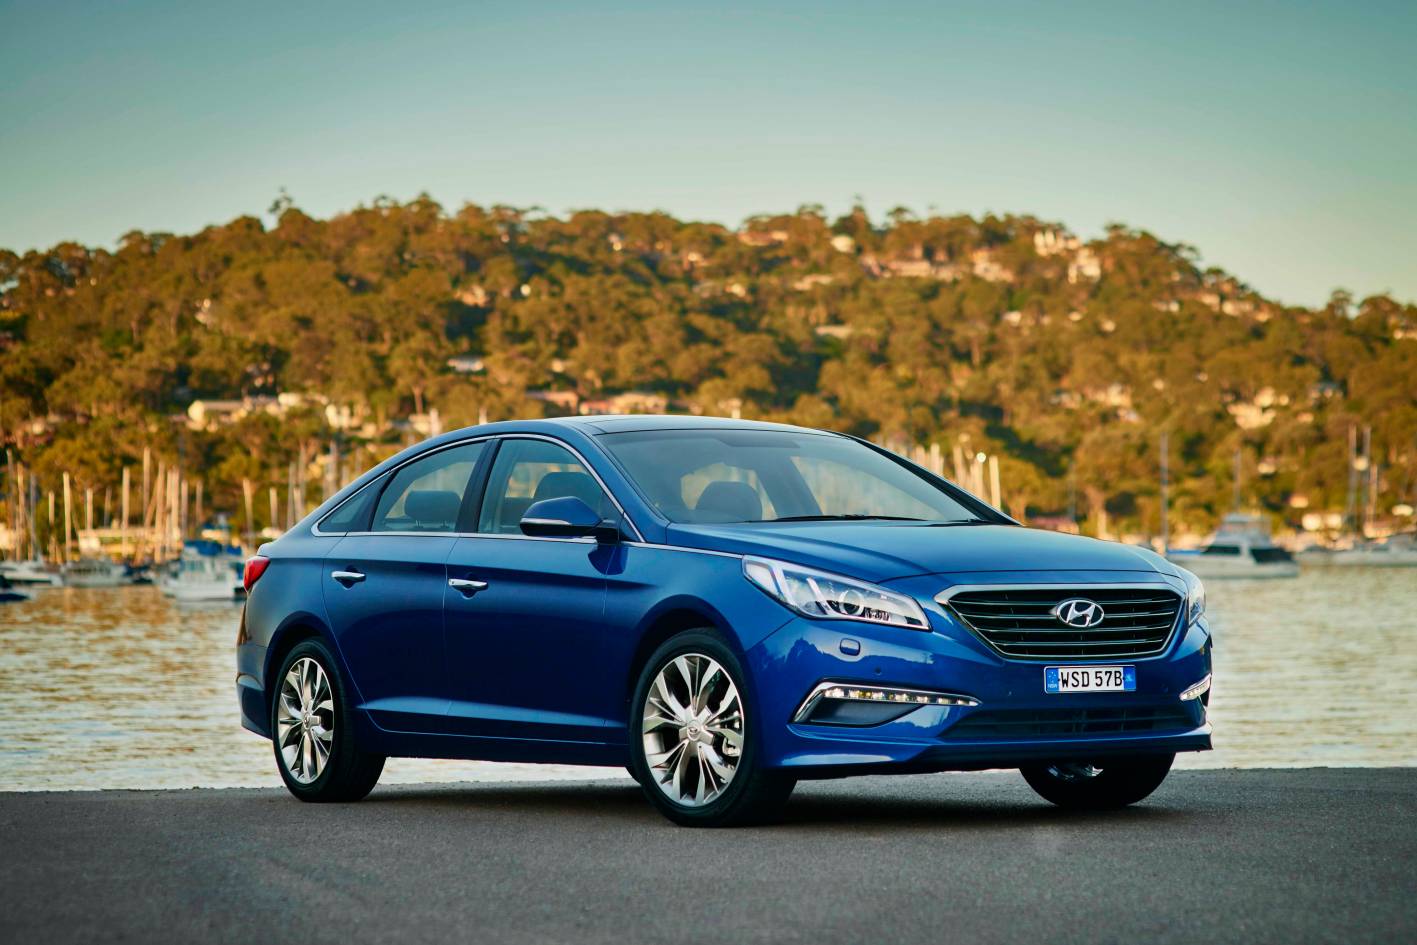 All-New 2015 Hyundai Sonata launched from $29,990 - ForceGT.com